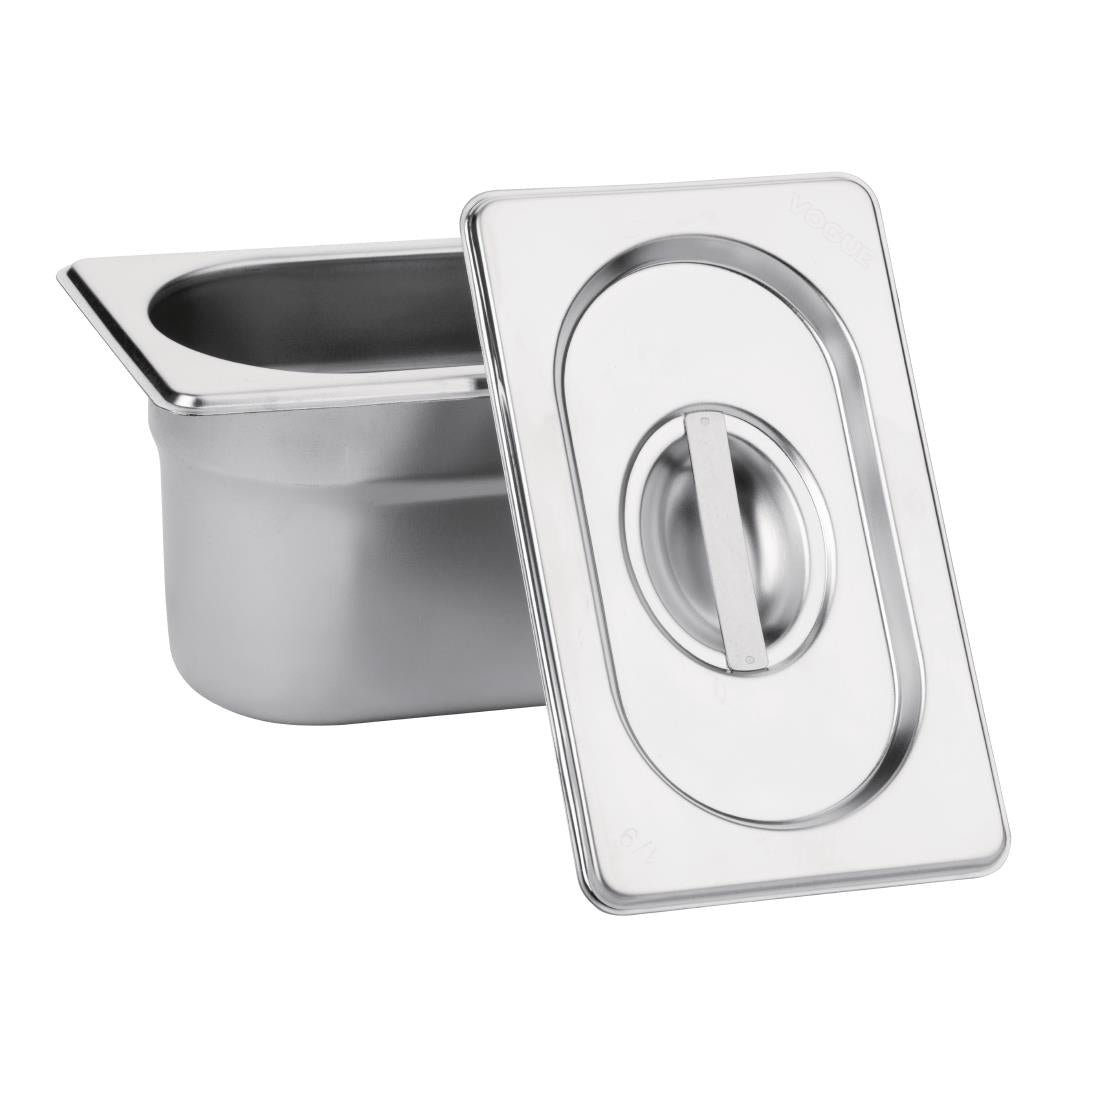 Vogue Stainless Steel 1/4 Gastronorm Lid